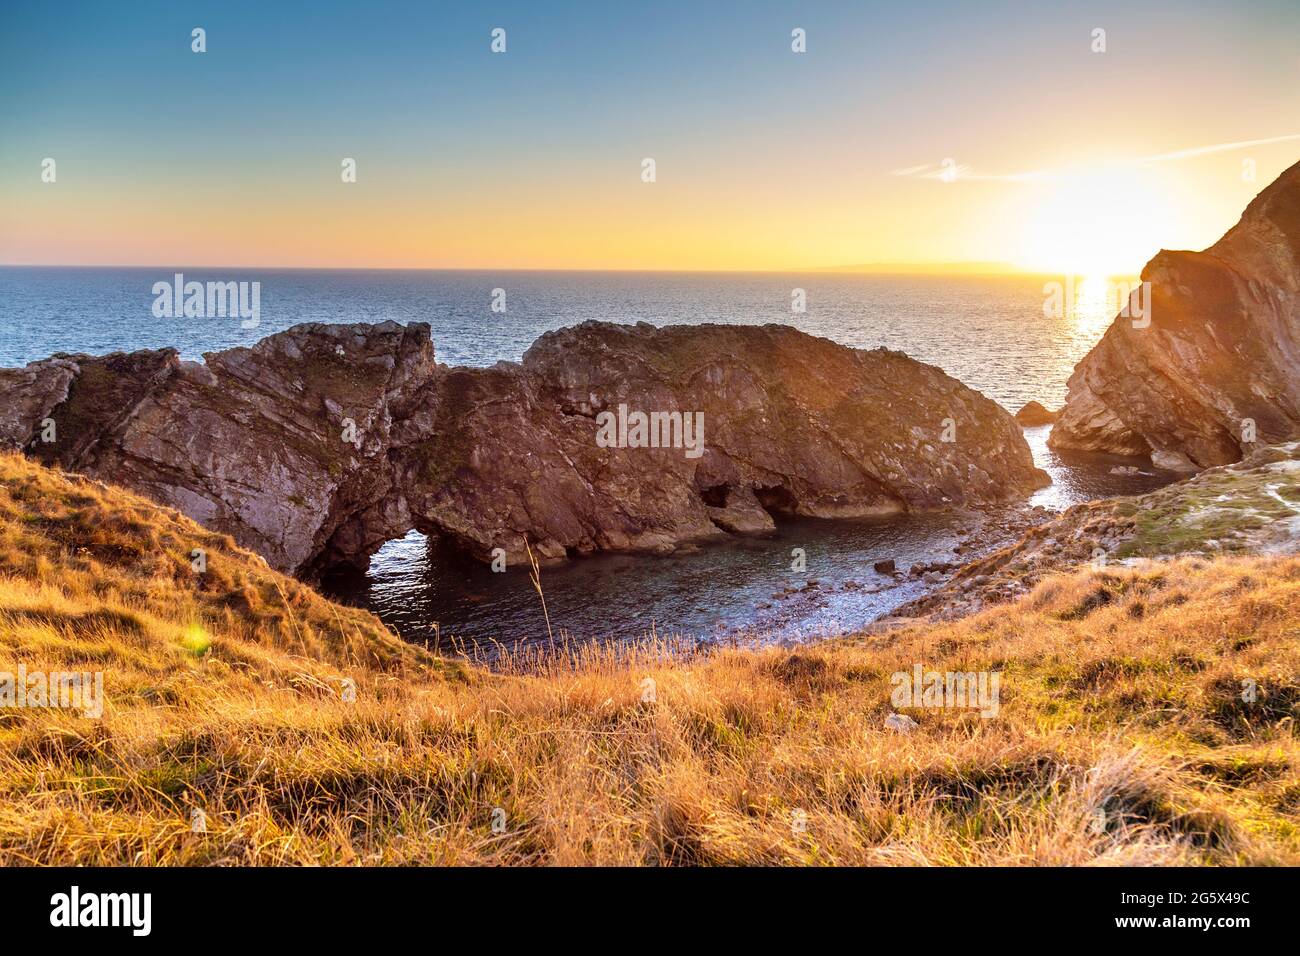 Stair Hole at sunset at Lulworth Cove, Dorset, UK Stock Photo